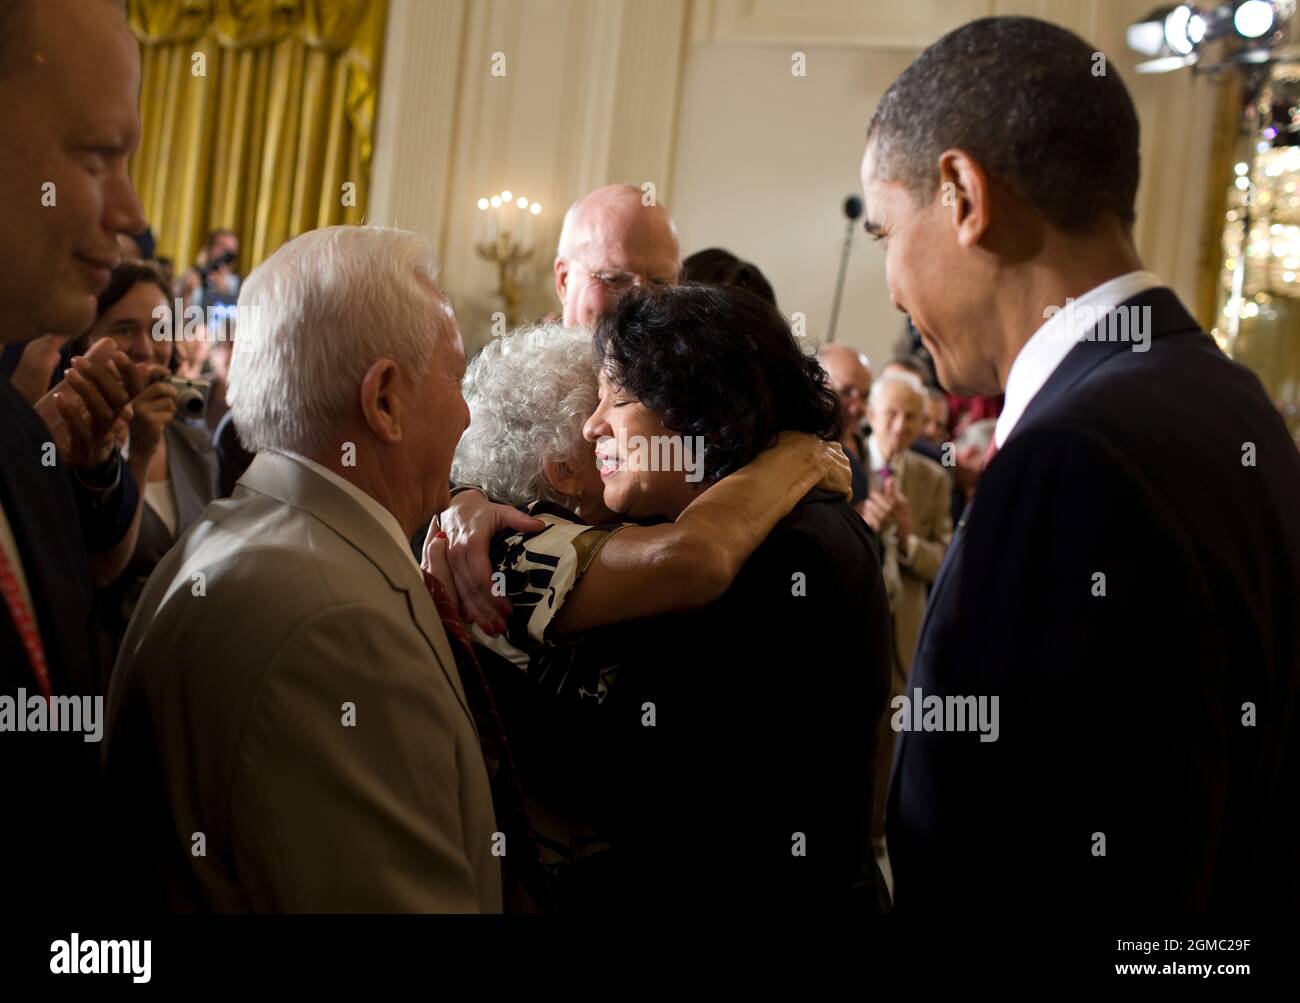 Aug. 12, 2009“The President had just paid tribute in an East Room reception to Supreme Court Justice Sonia Sotomayor, who had just been sworn-in. As they left the stage, Justice Sotomayor hugged her mother who was sitting in the front row.” (Official White House photo by Pete Souza)  This official White House photograph is being made available only for publication by news organizations and/or for personal use printing by the subject(s) of the photograph. The photograph may not be manipulated in any way and may not be used in commercial or political materials, advertisements, emails, products, Stock Photo